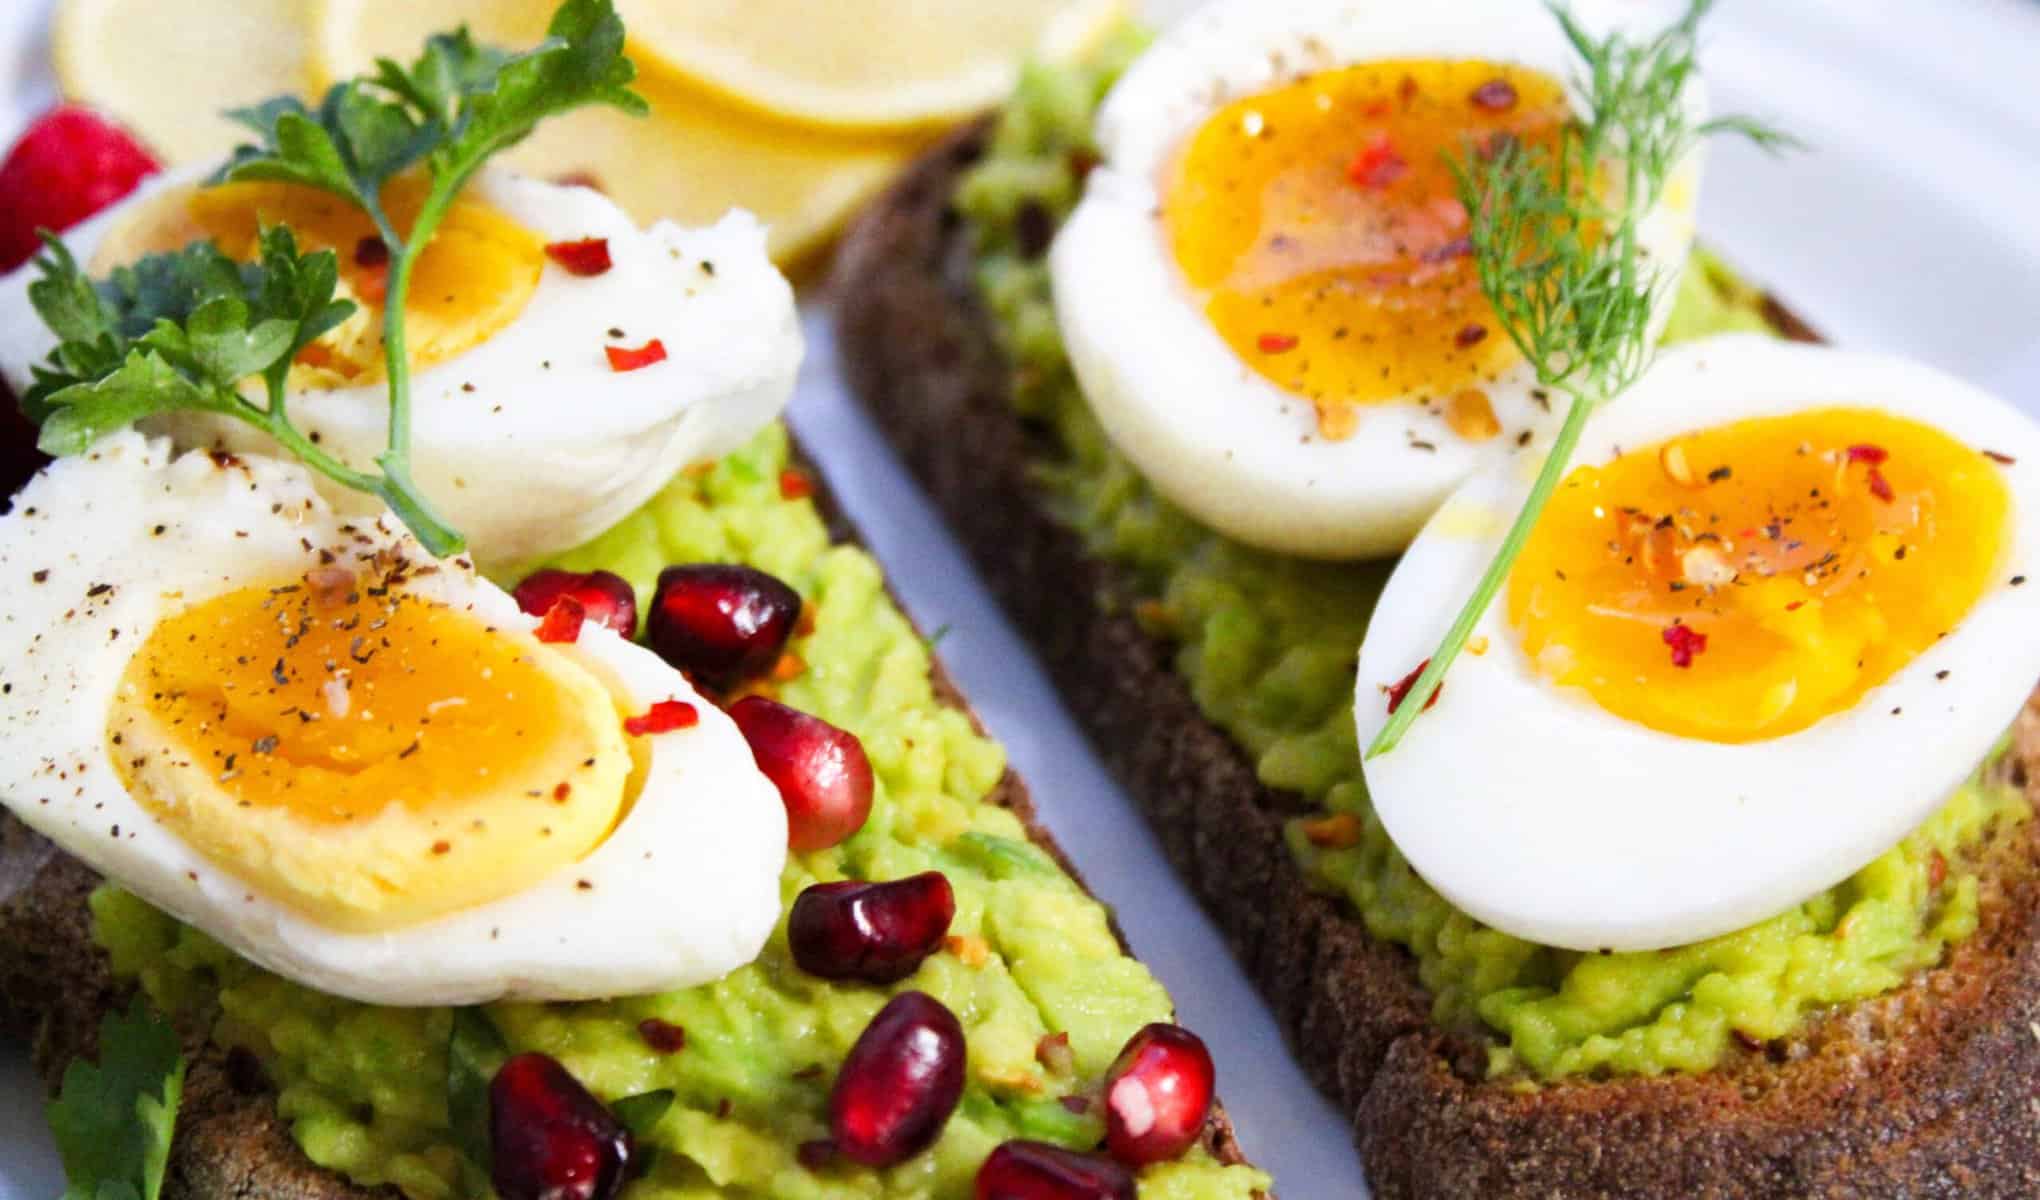 Boiled eggs placed on avocado toast for a healthy breakfast